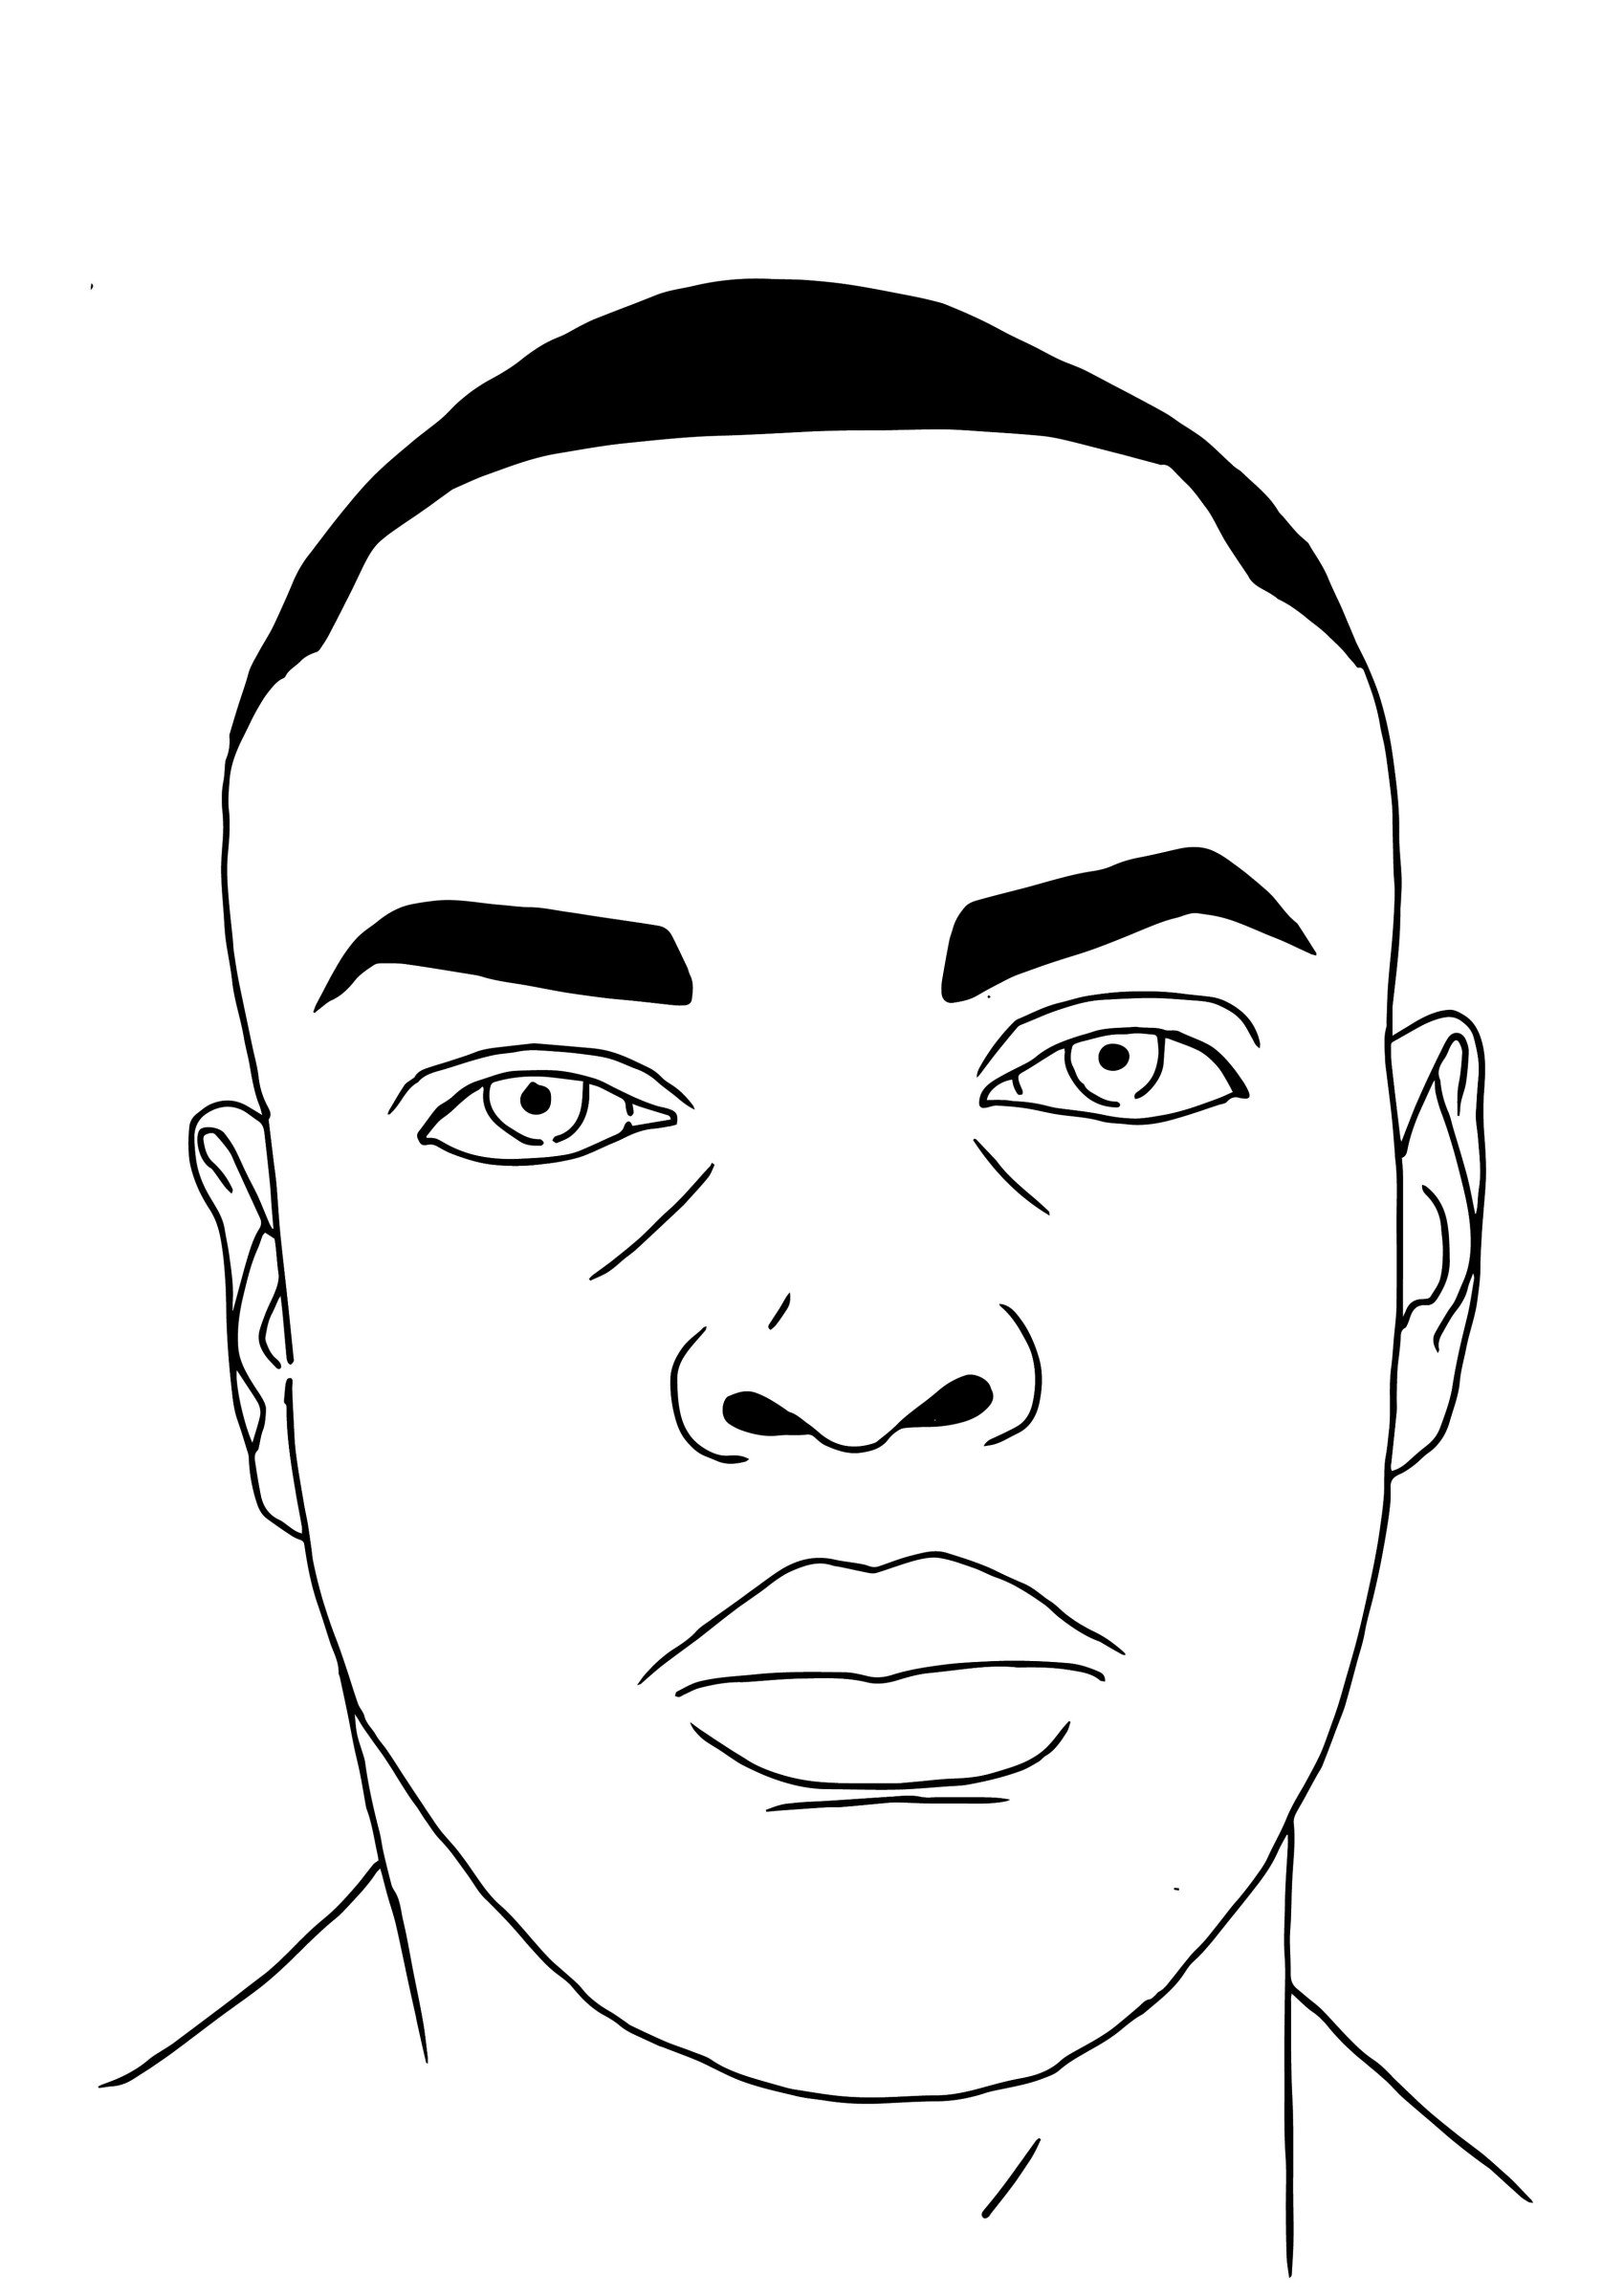 Face outline